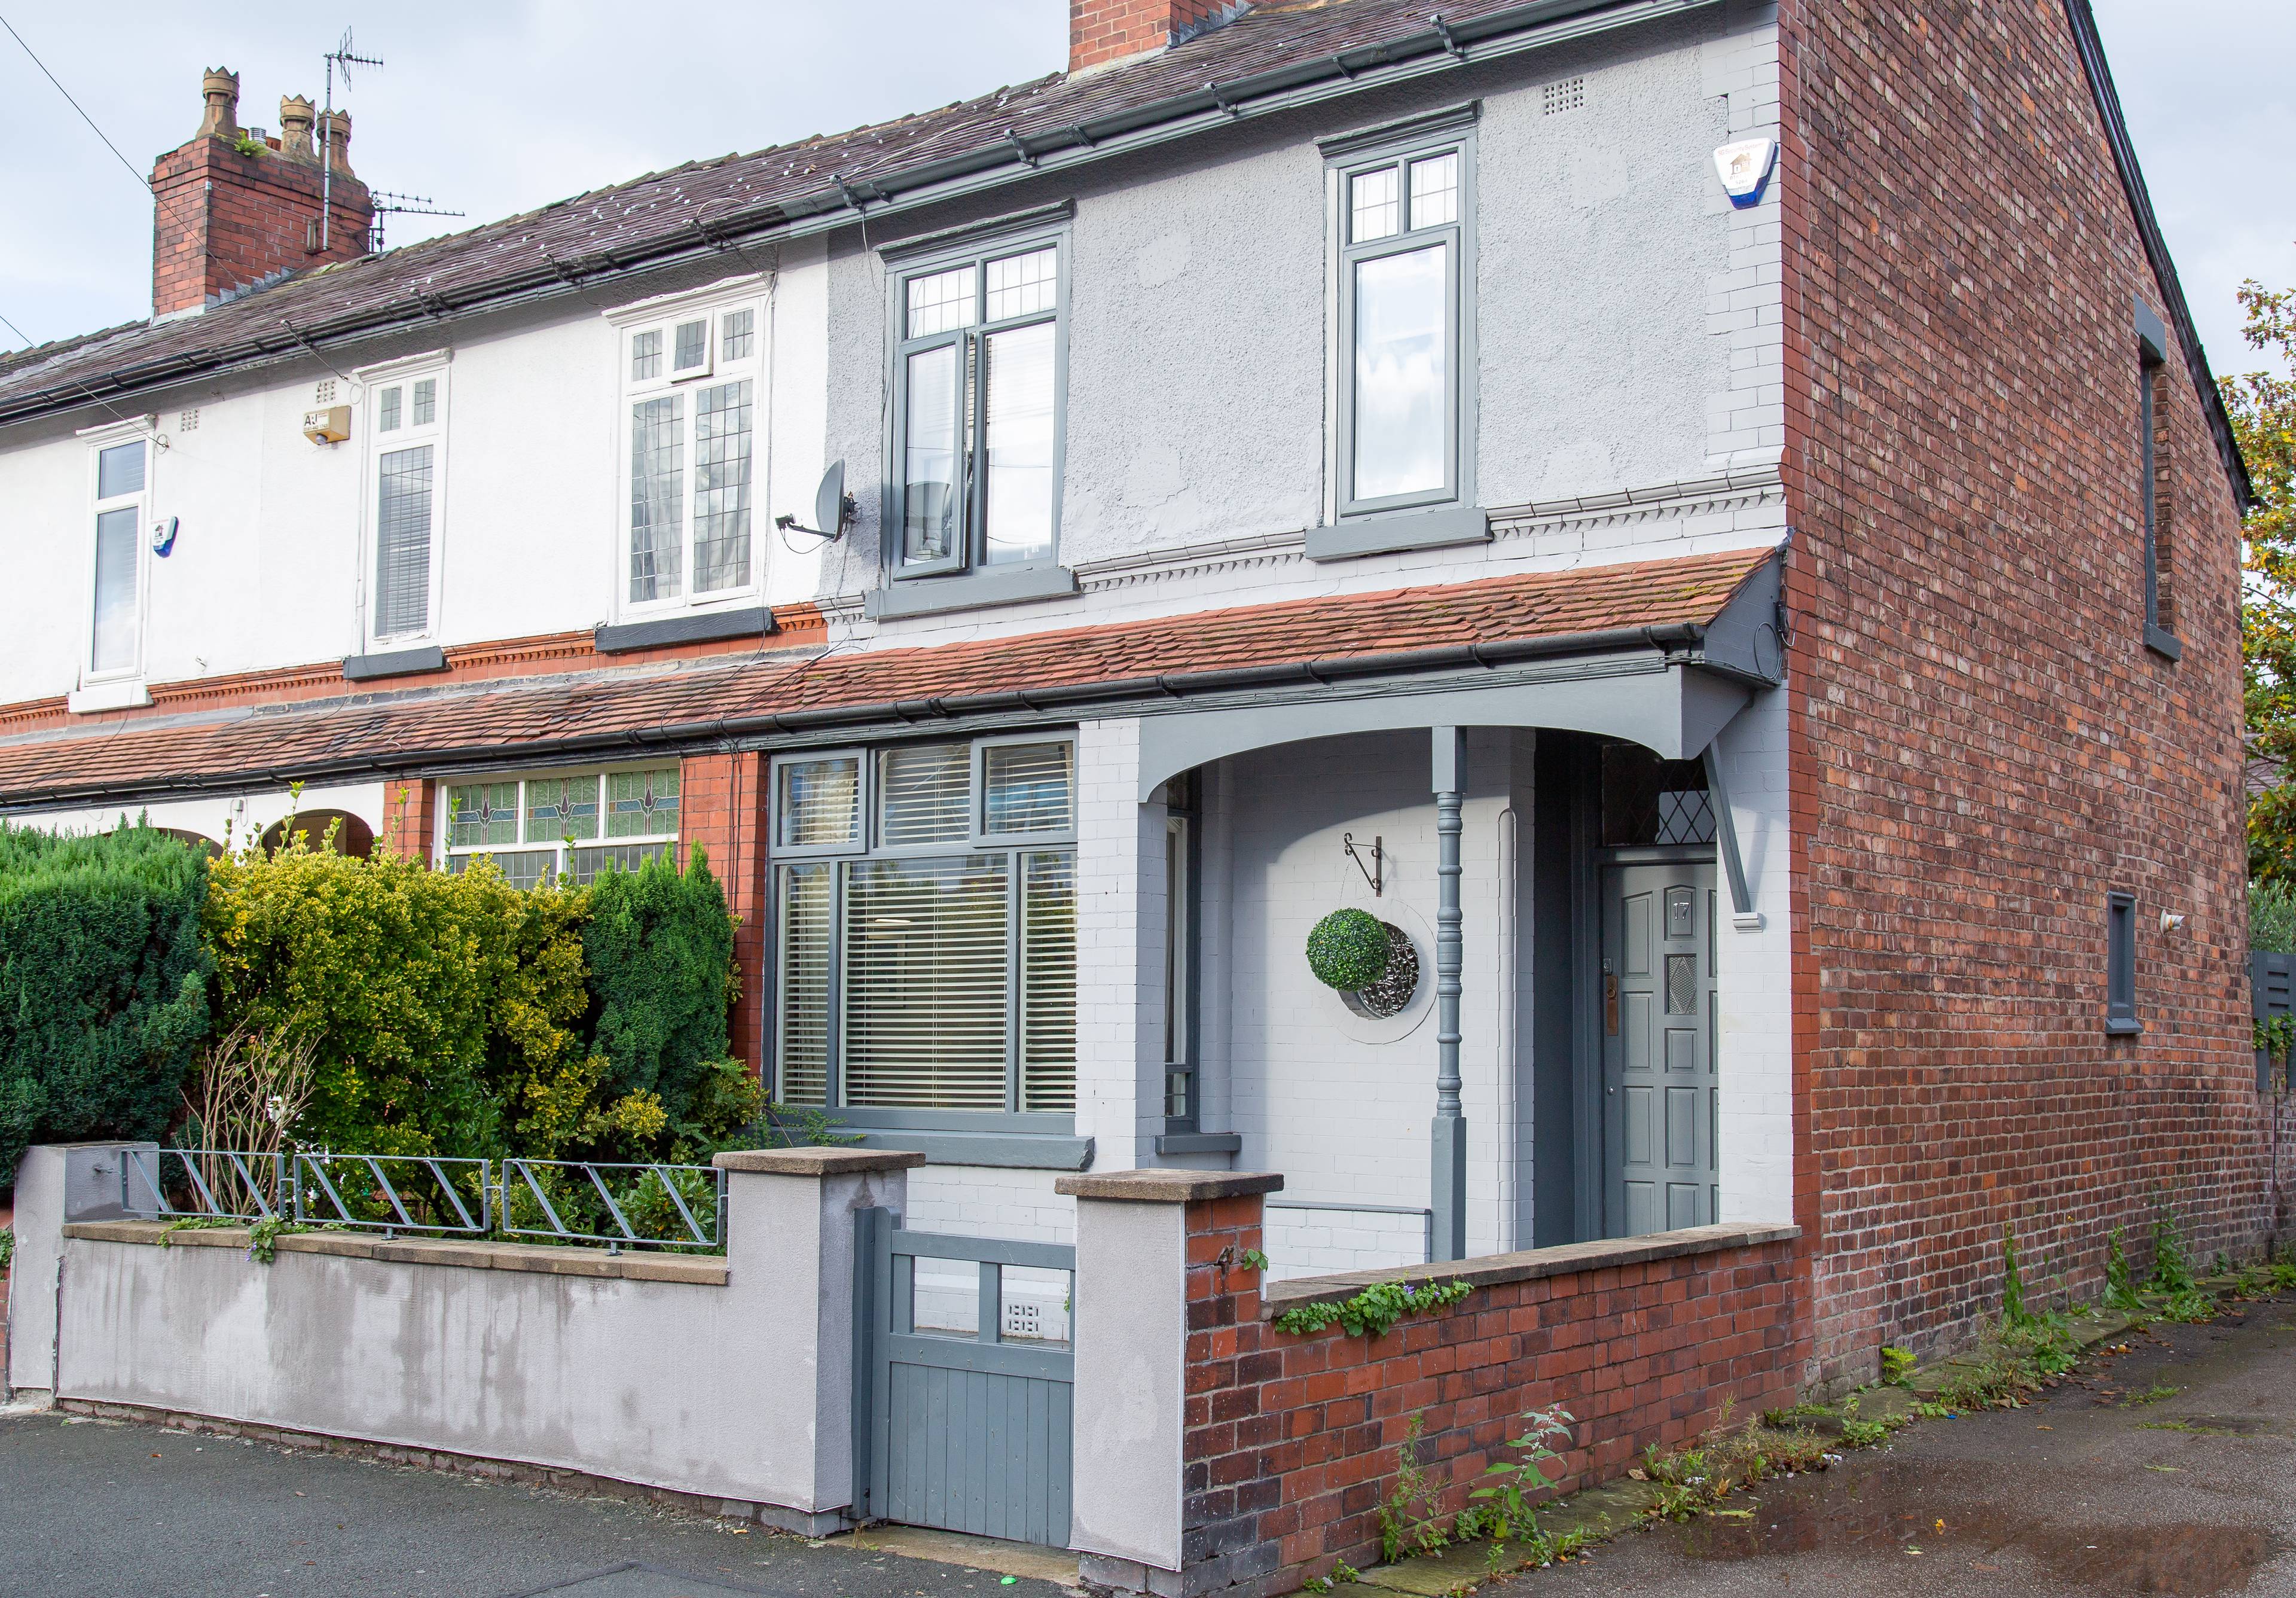 A 'character filled' end of terrace home located within a short stroll to the vibrant Didsbury Village, Metrolink and schools.